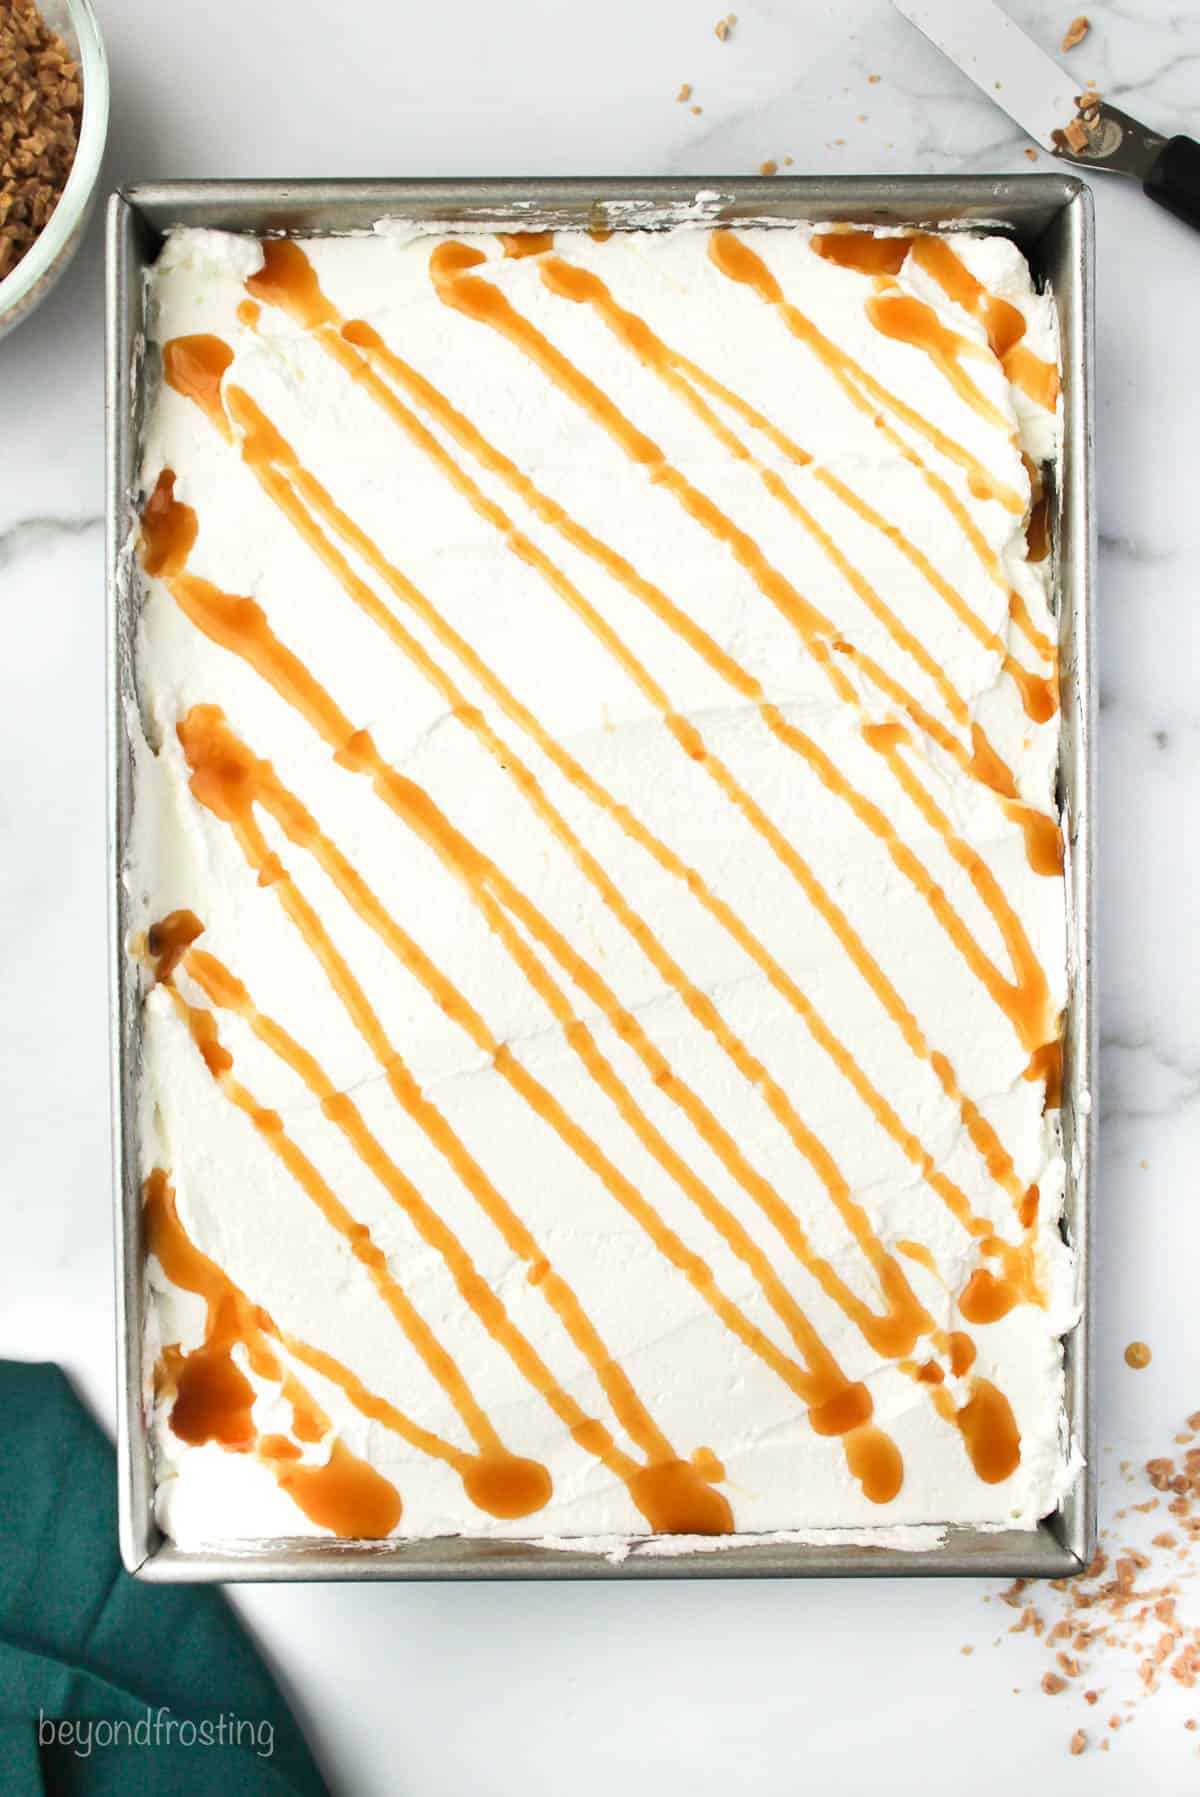 A caramel chocolate cake in a pan frosted with whipped cream and drizzled with extra caramel